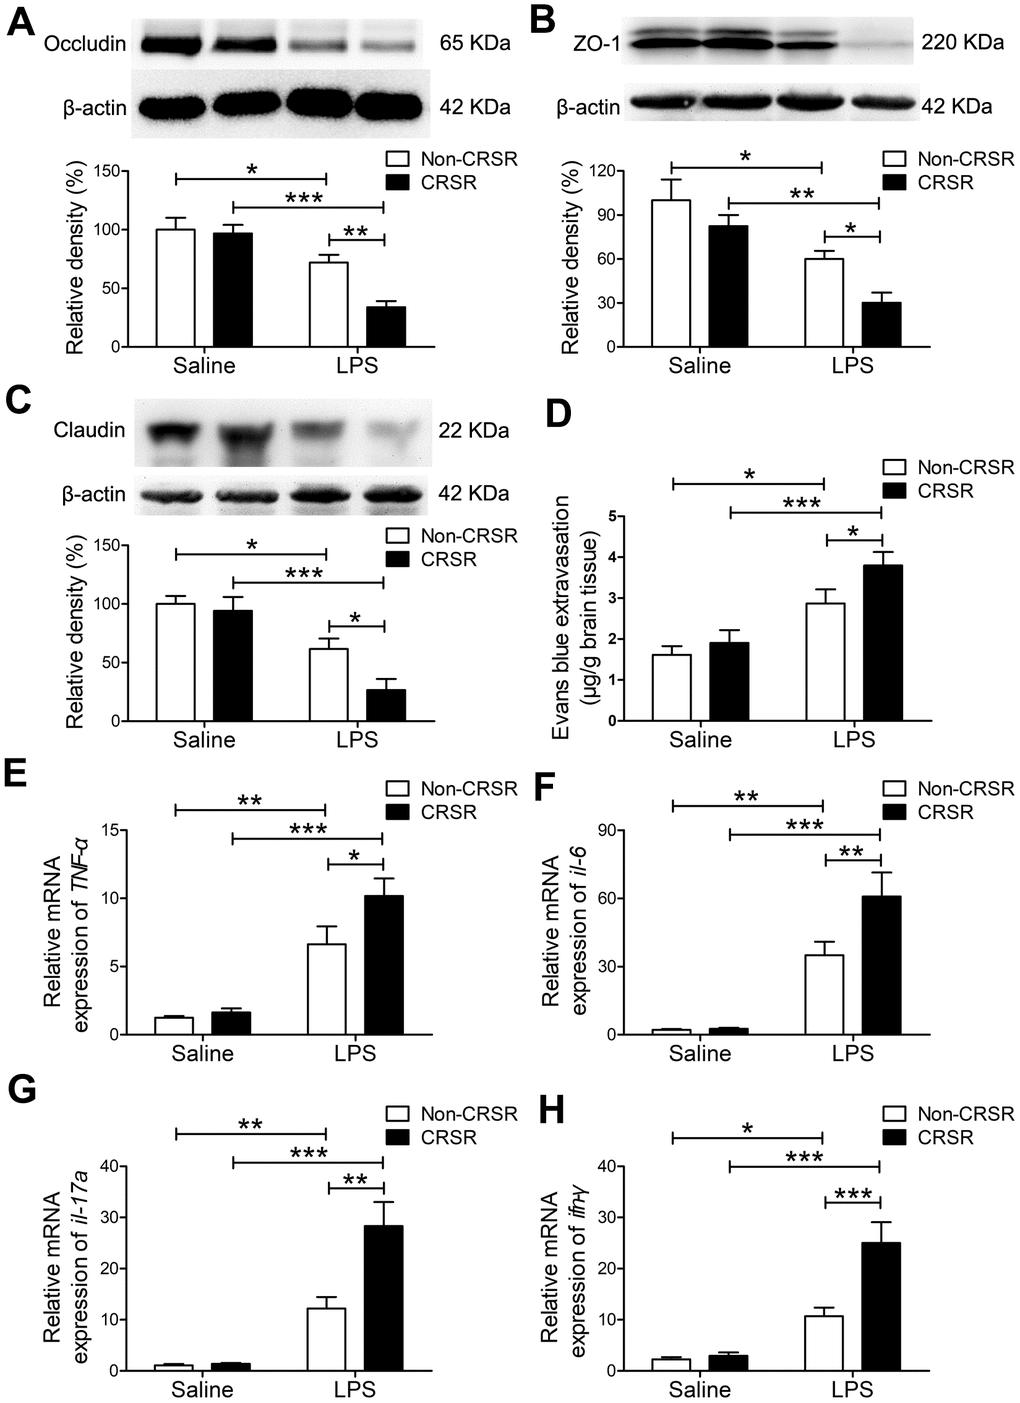 Effects of chronic and repeated short-term sleep restriction (CRSR) on lipopolysaccharide (LPS)-induced blood-brain barrier (BBB) disruption and hippocampal inflammation 24 hours after LPS treatment. Western blot analysis of the expression of the tight junction proteins occludin (A), zona occluden-1 (ZO-1; B) and claudin (C) in the brain. (D) Evans blue dye extravasation test. LPS-induced decreases in hippocampal tight junction protein levels and increase in Evans blue dye extravasation into the brain were exaggerated by CRSR. Quantitative real-time PCR (qRT-PCR) analysis of hippocampal gene expression of TNF-α (E), IL-6 (F), IL-17A (G), and IFN-γ (H). The LPS-induced increase in hippocampal expression of these genes was exaggerated by CRSR. Data represent means ± SEM, n = 6; *P 